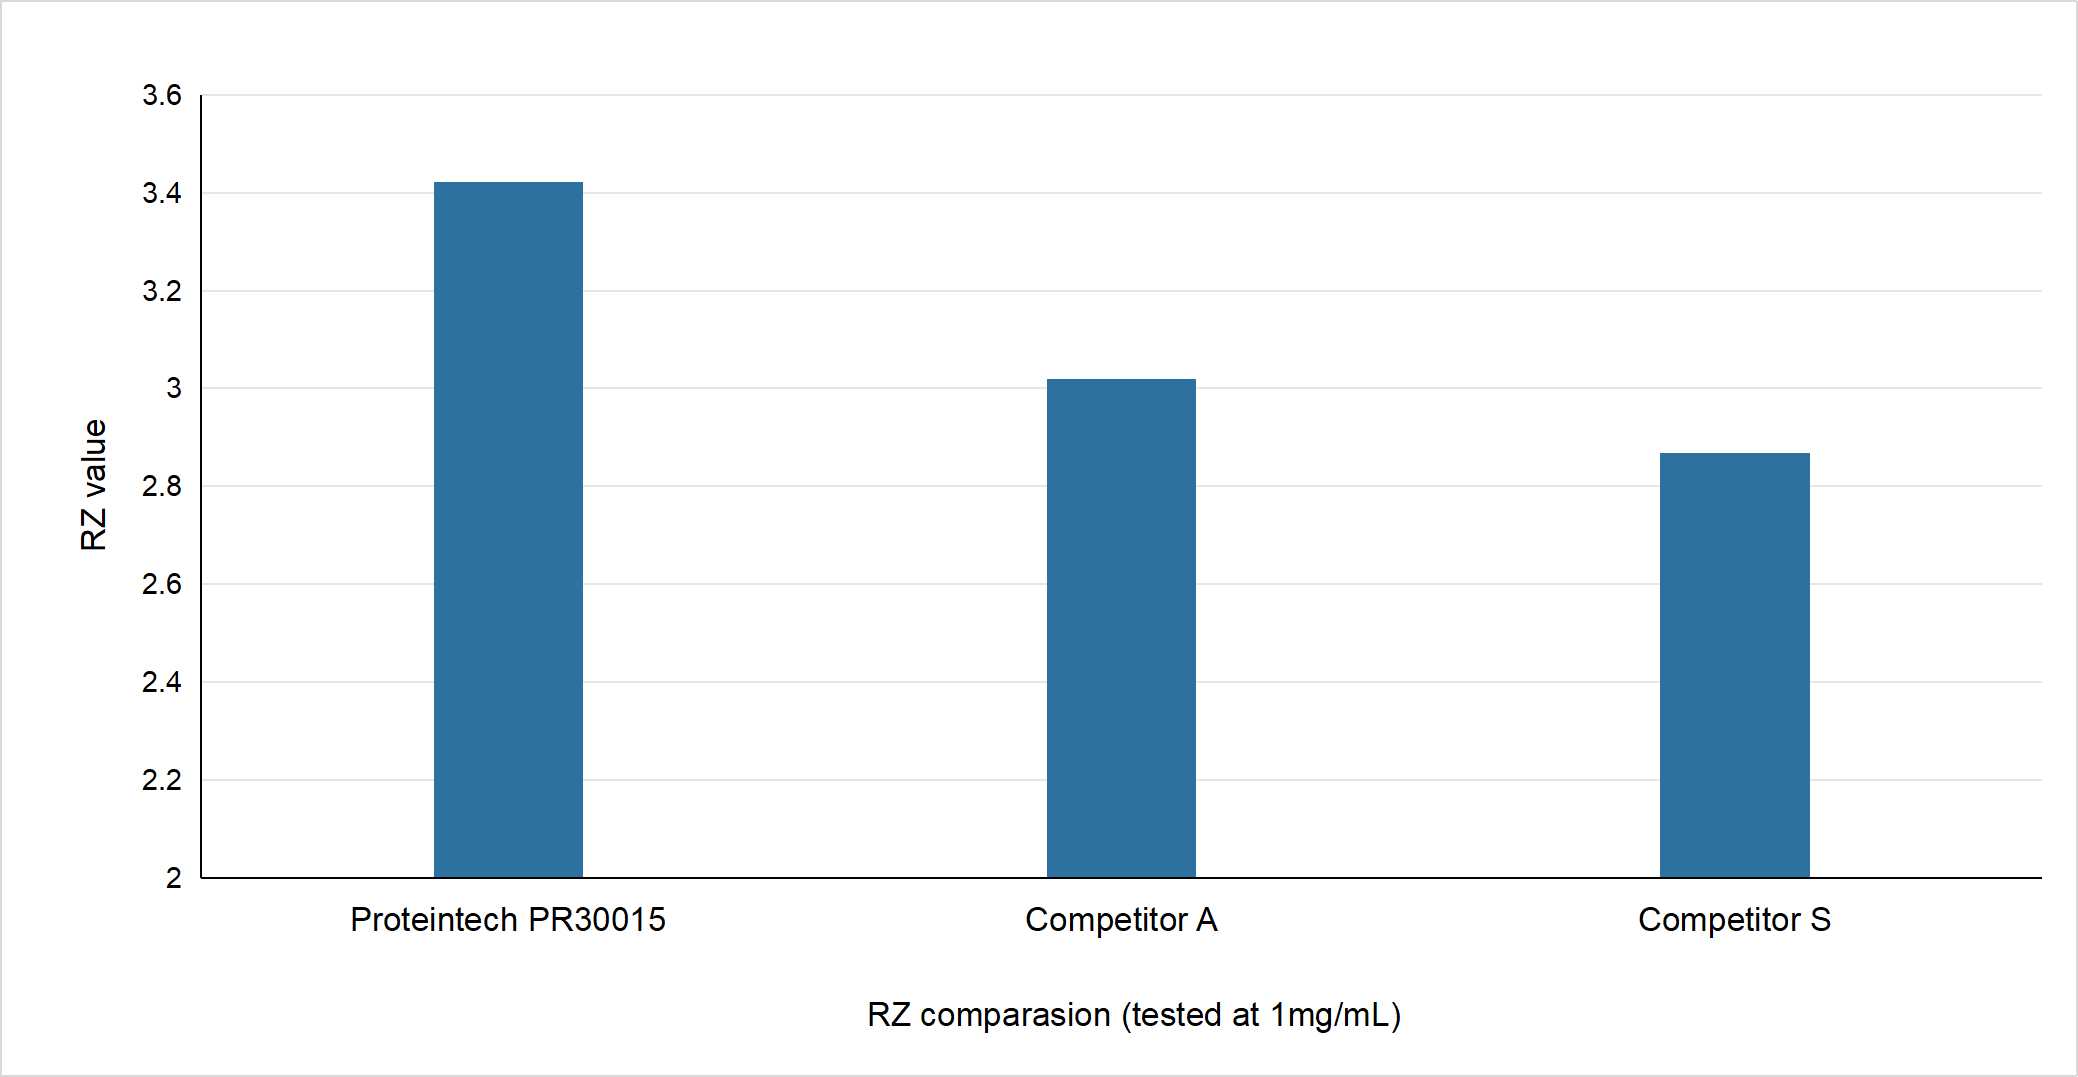 RZ comparasion for Proteintech HRP (PR30015) and competitors'. Higher RZ is often correlated with higher activity. （Jiang, Na, et al. 